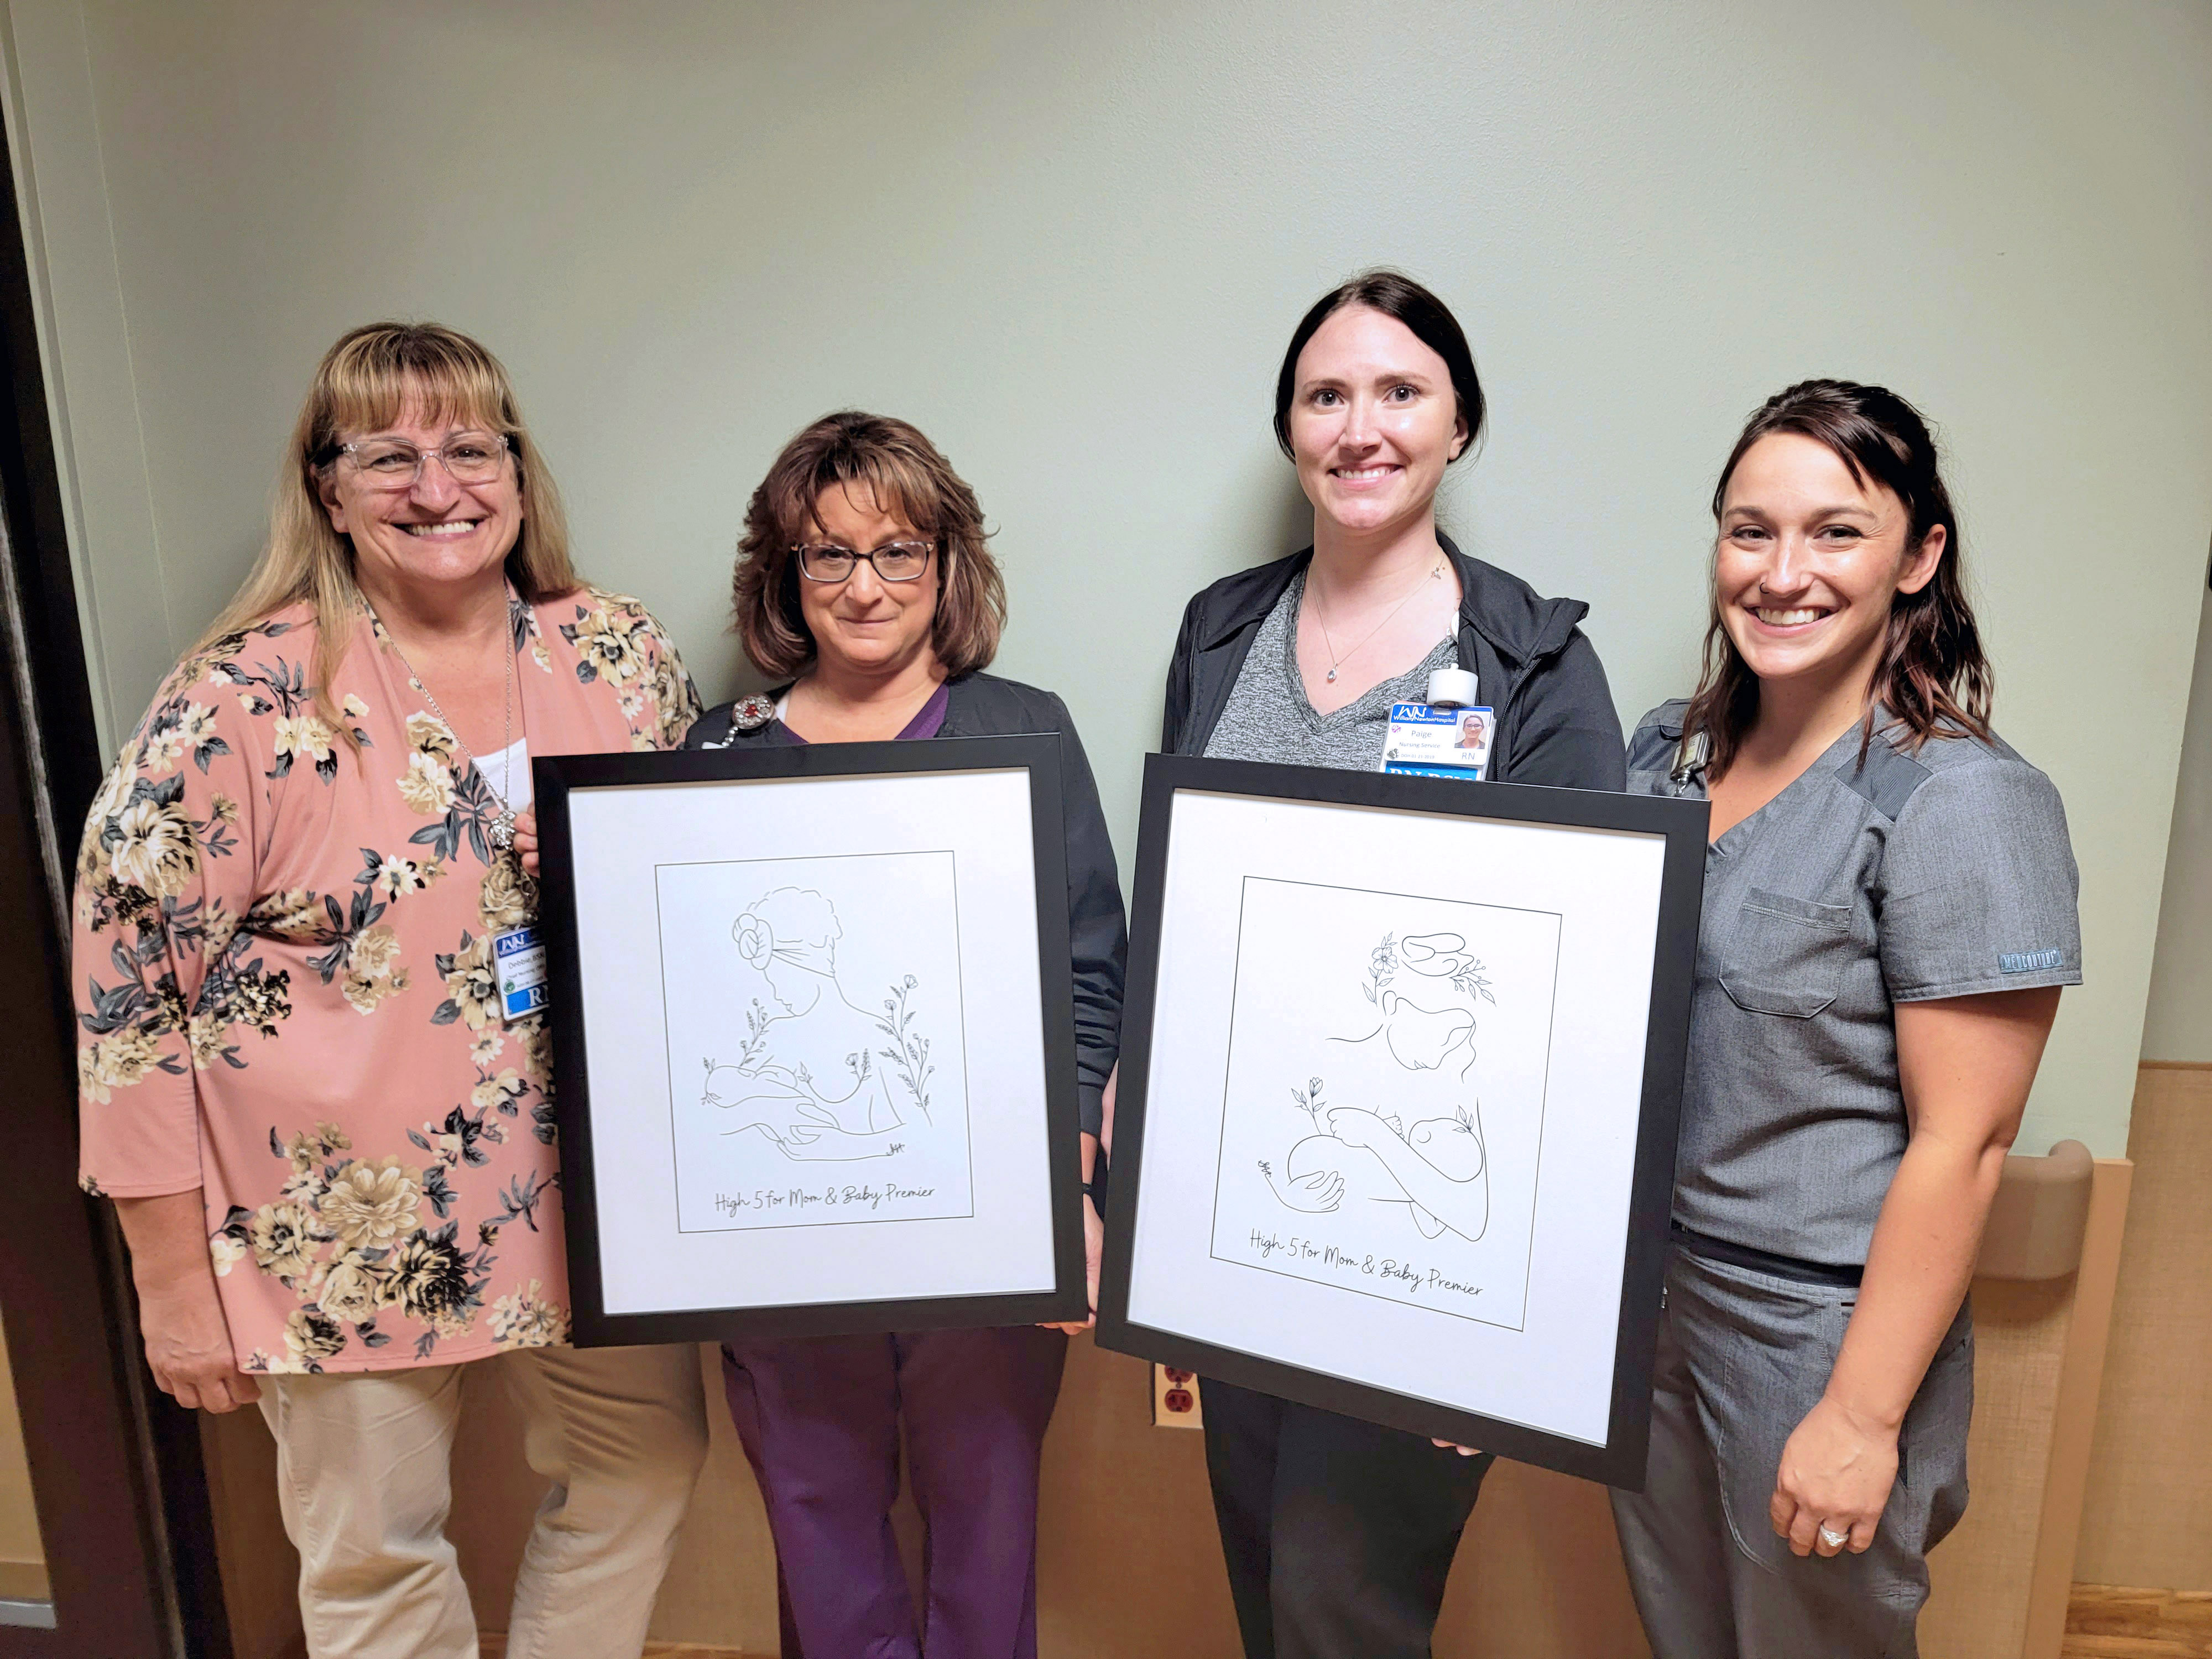 William Newton Hospital Family Birthing Center staff proudly display their High 5 for Mom & Baby art pieces. Pictured from left to right is Chief Nursing Officer Debbie Marrs, OB nurse Angie Brooks, OB nurse Paige Smith, and Family Birthing Center Manager Rachel Livingston.